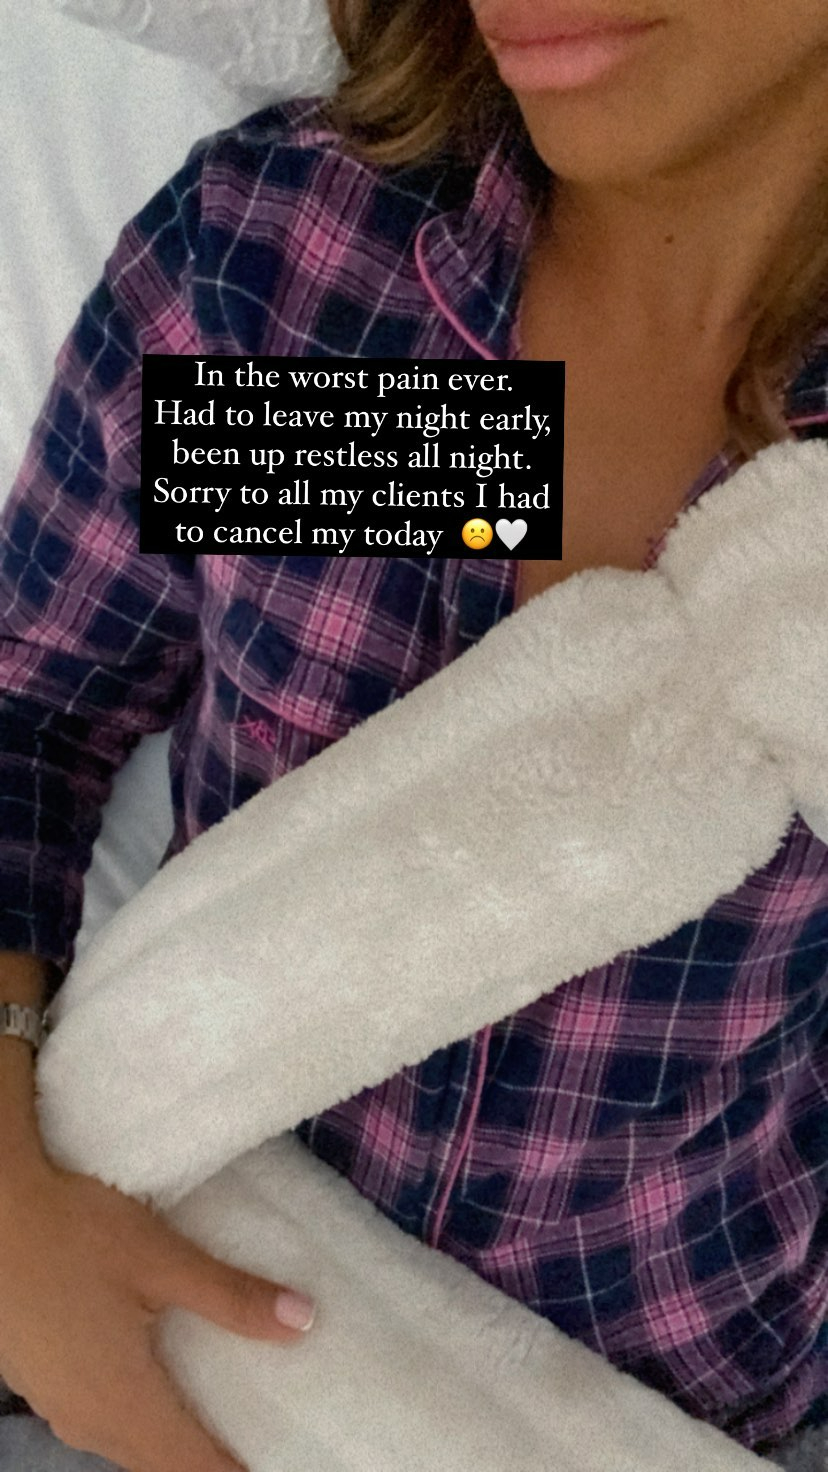 Towie star cancels work amid health battle and says she’s in the ‘worst pain ever’